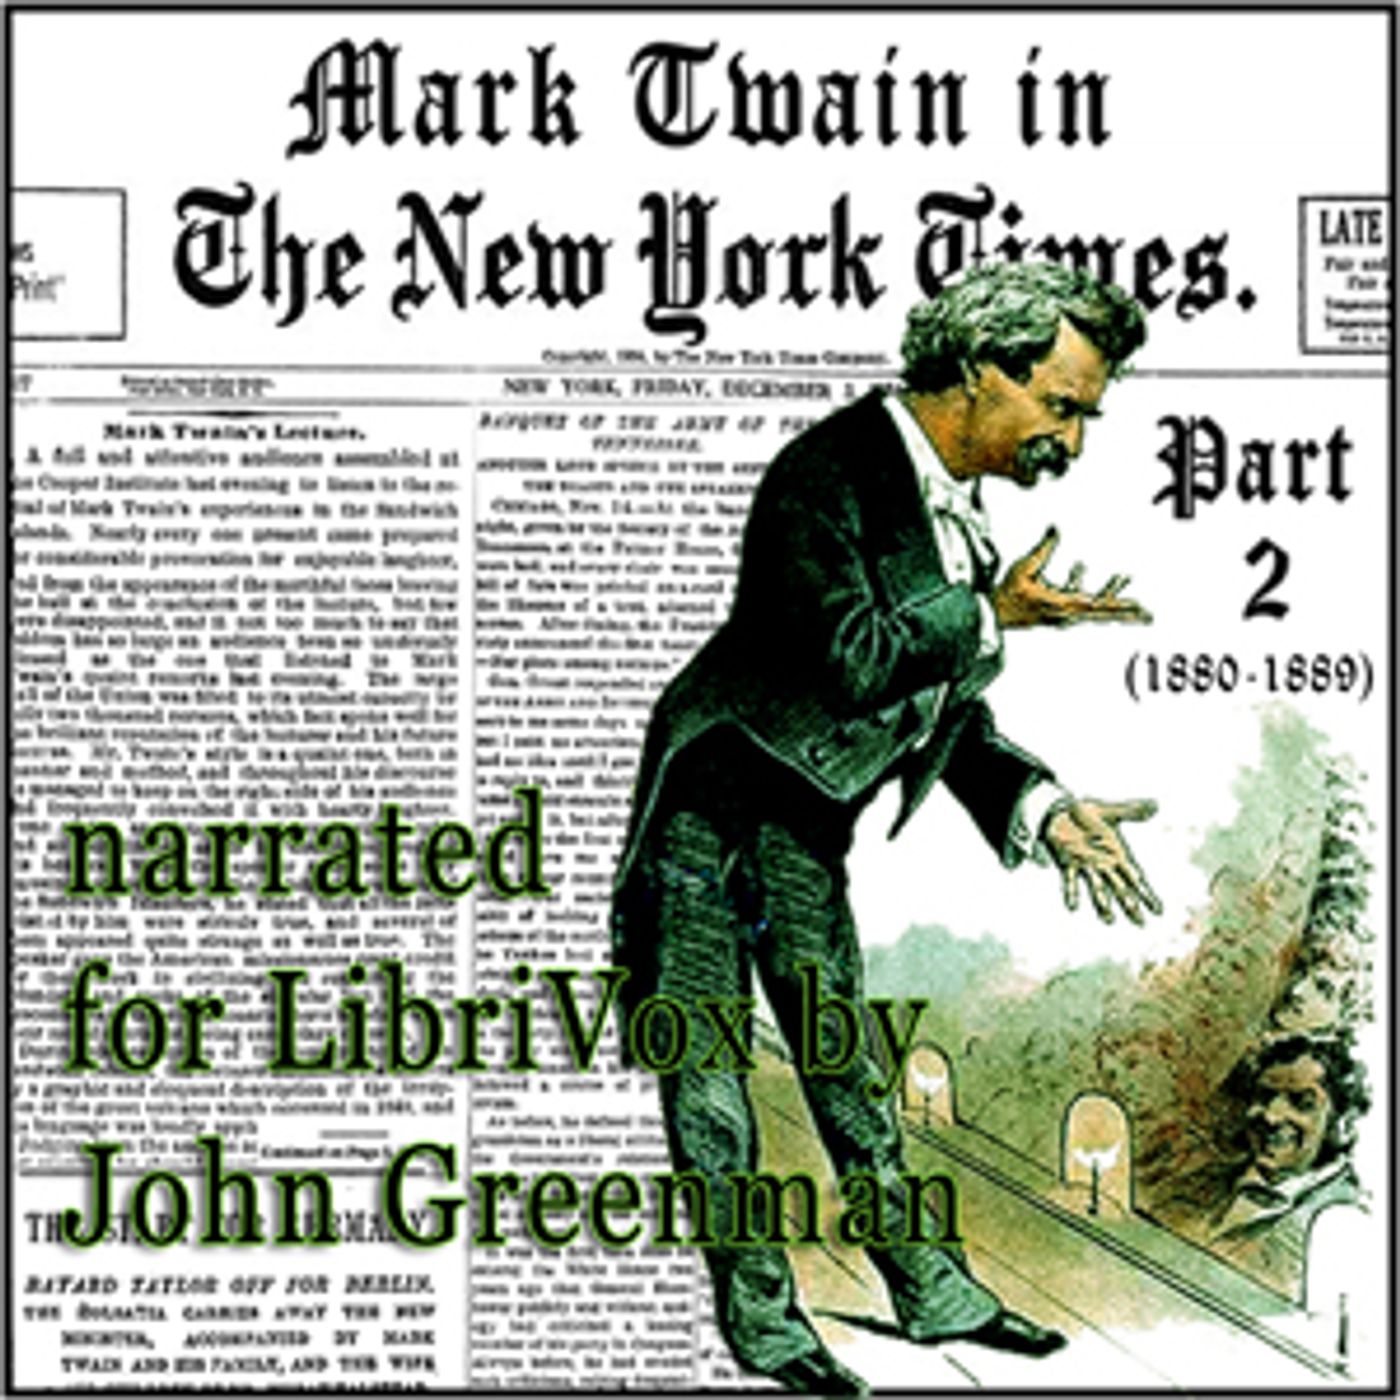 Mark Twain in the New York Times, Part Two (1880-1889) by Mark Twain (1835 – 1910) and The New York